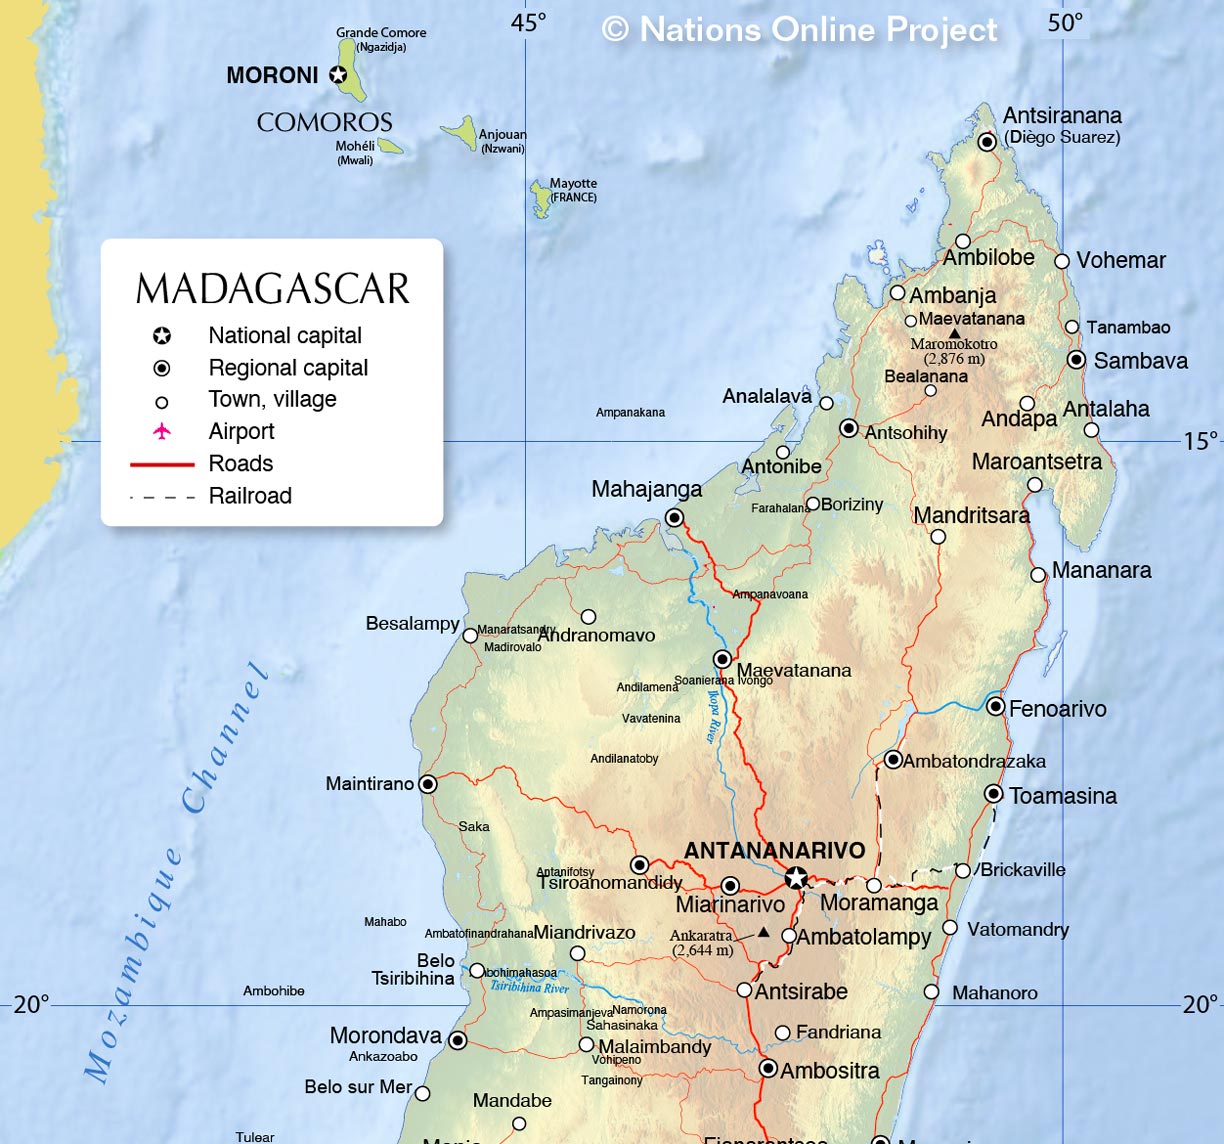 Madagascar - A Country Profile - Nations Online Project